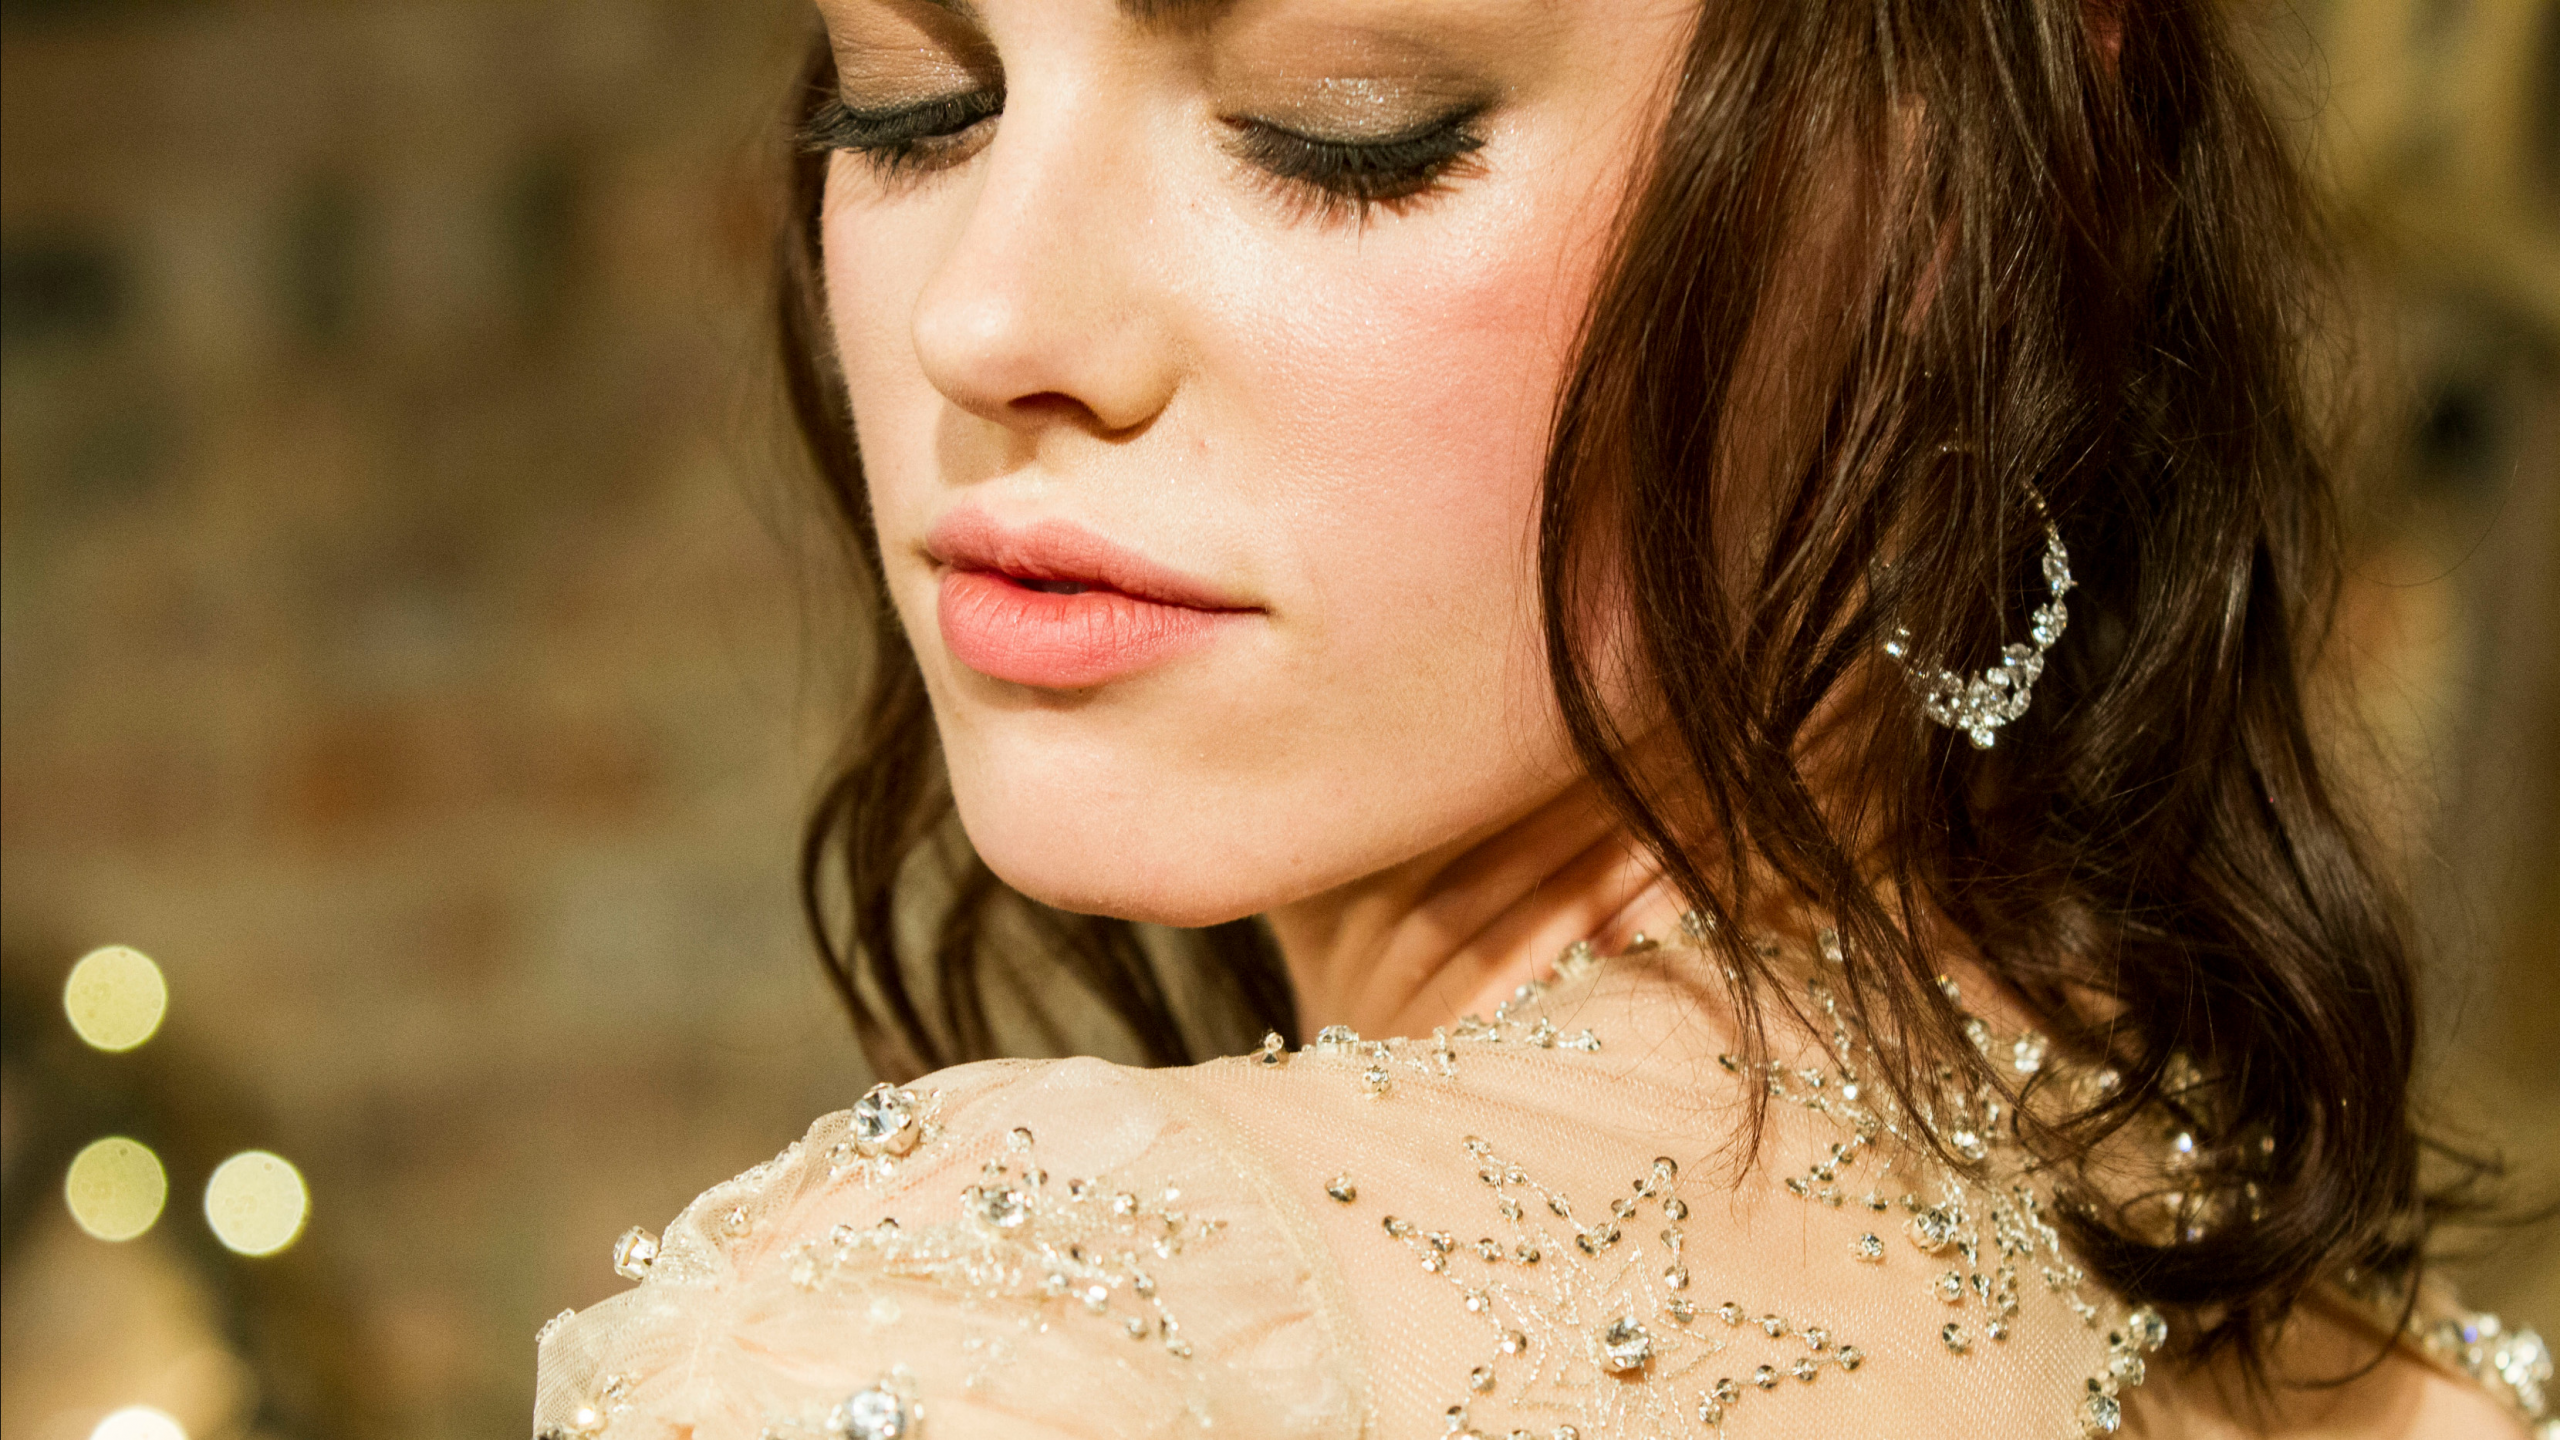 Makeup Artist For Wedding
 The Best Advice for When You Book Your Wedding Makeup